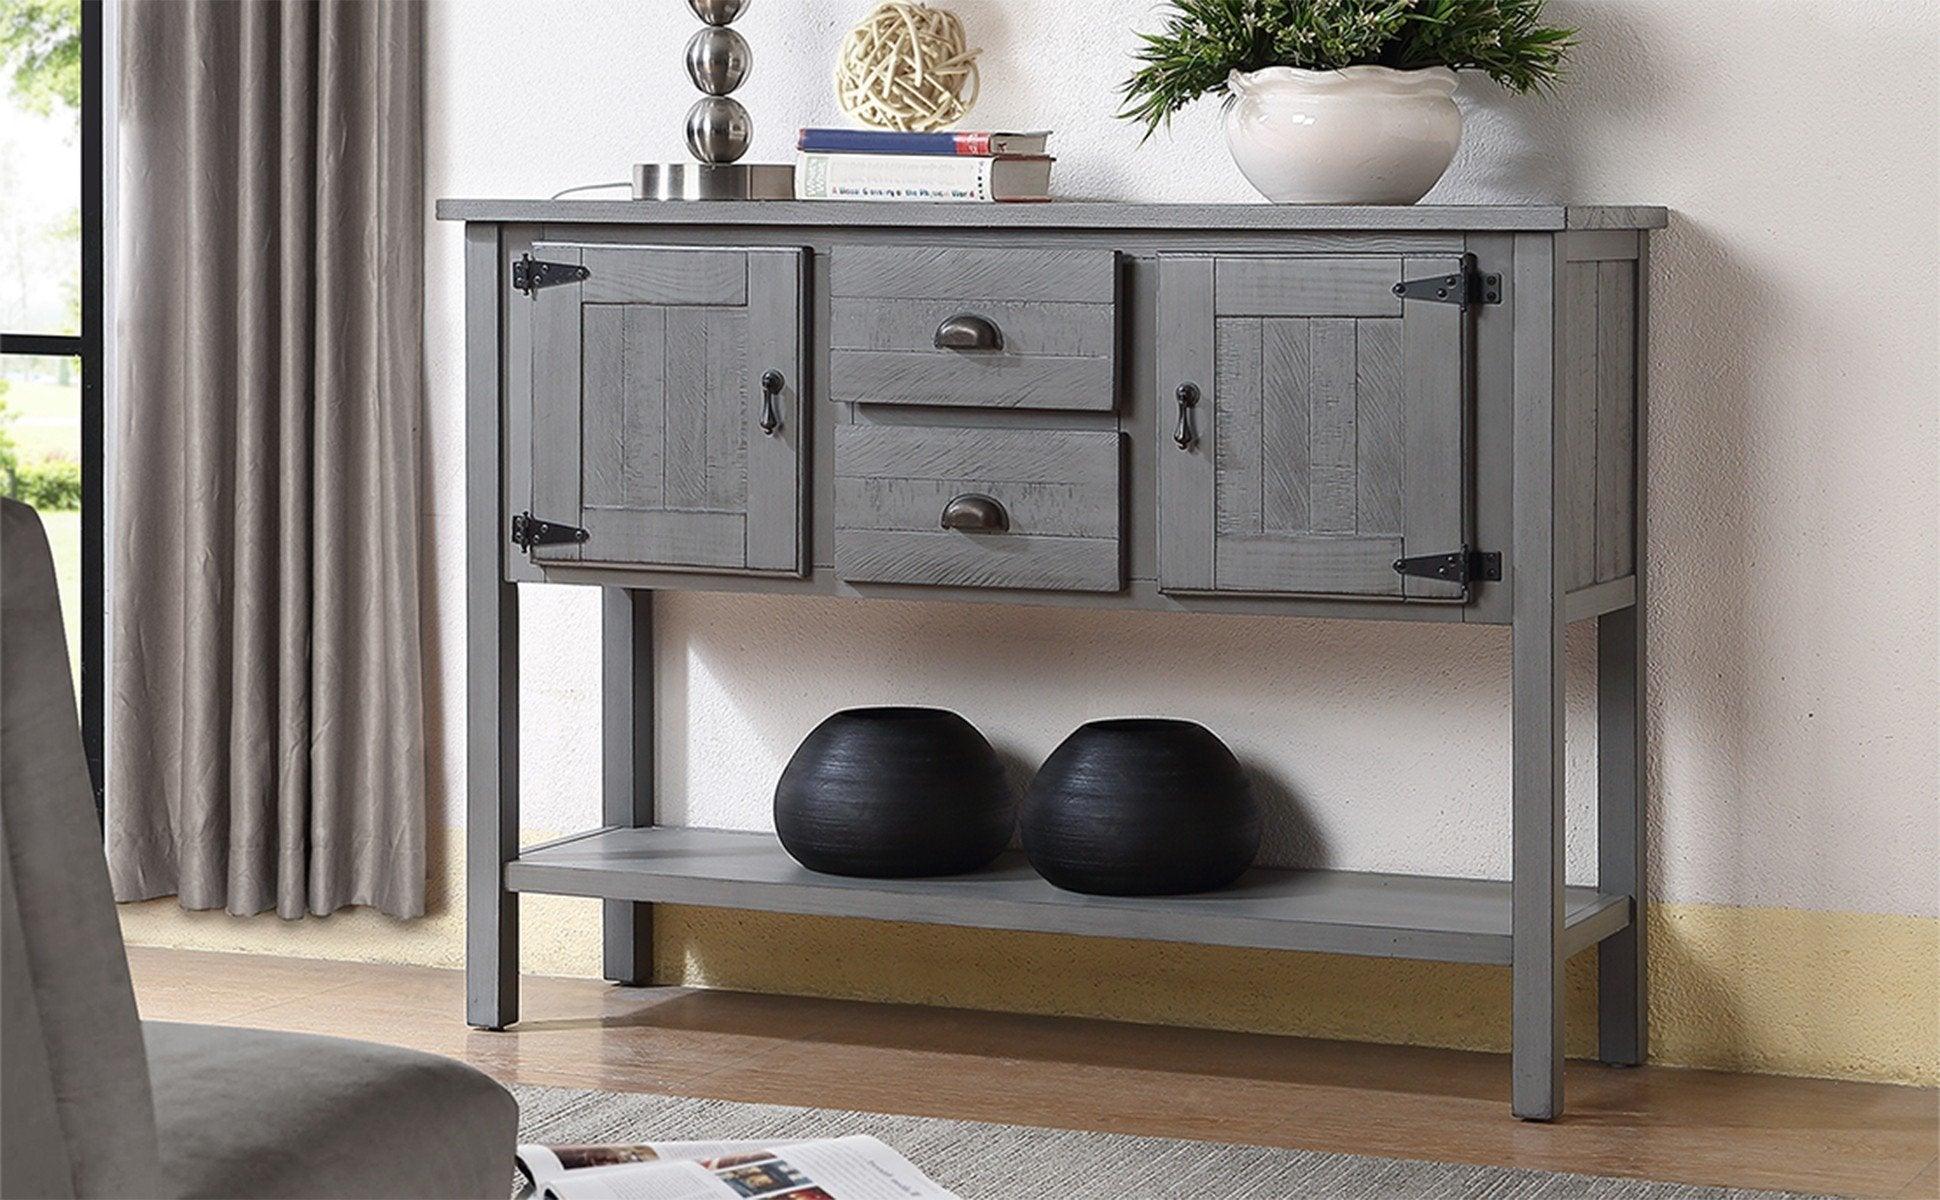 48'' Solid Wood Sideboard Console Table With 2 Drawers And Cabinets And Bottom Shelf, Retro Style Storage Dining Buffet Server Cabinet For Living Room Kitchen Dining Room(Antique Gray) LamCham